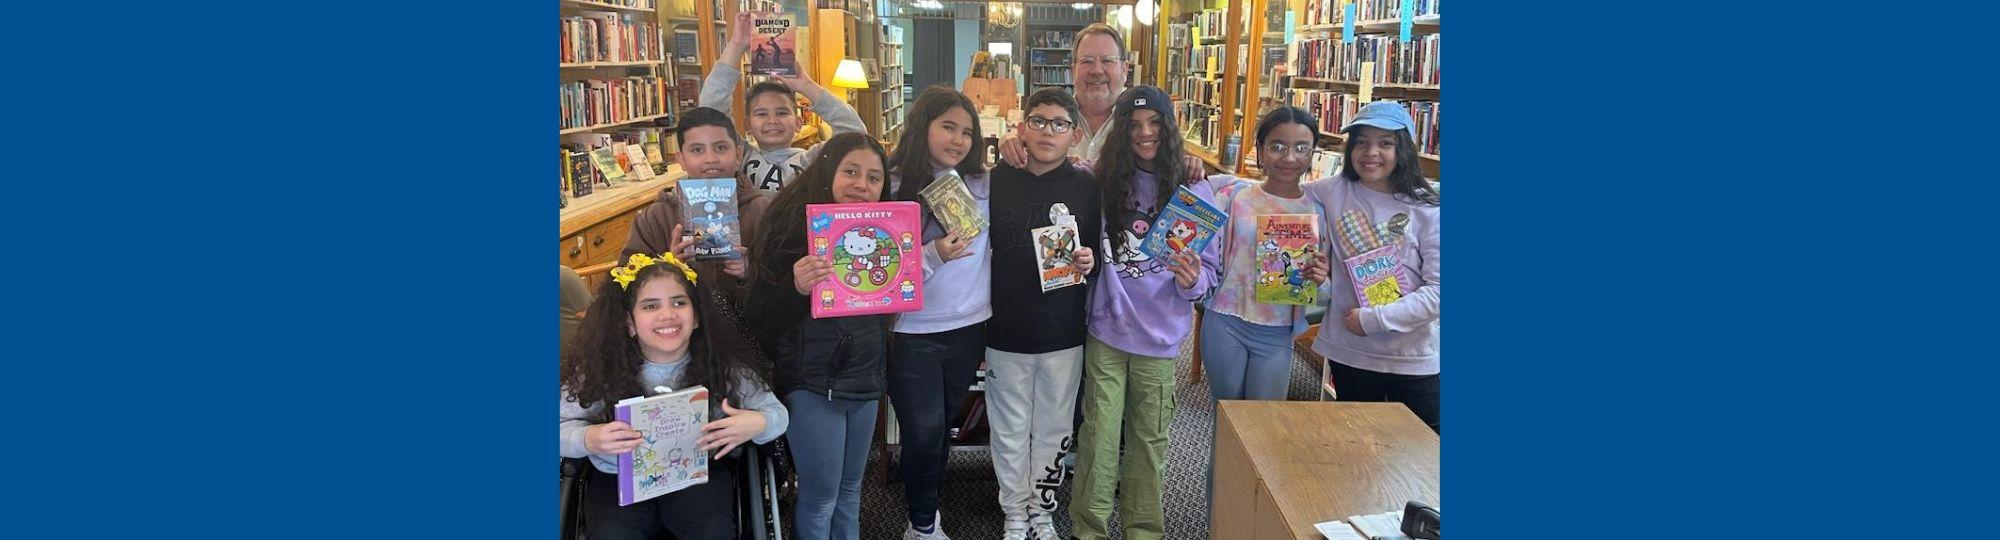 group of kids in bookstore each proudly holding their book choice